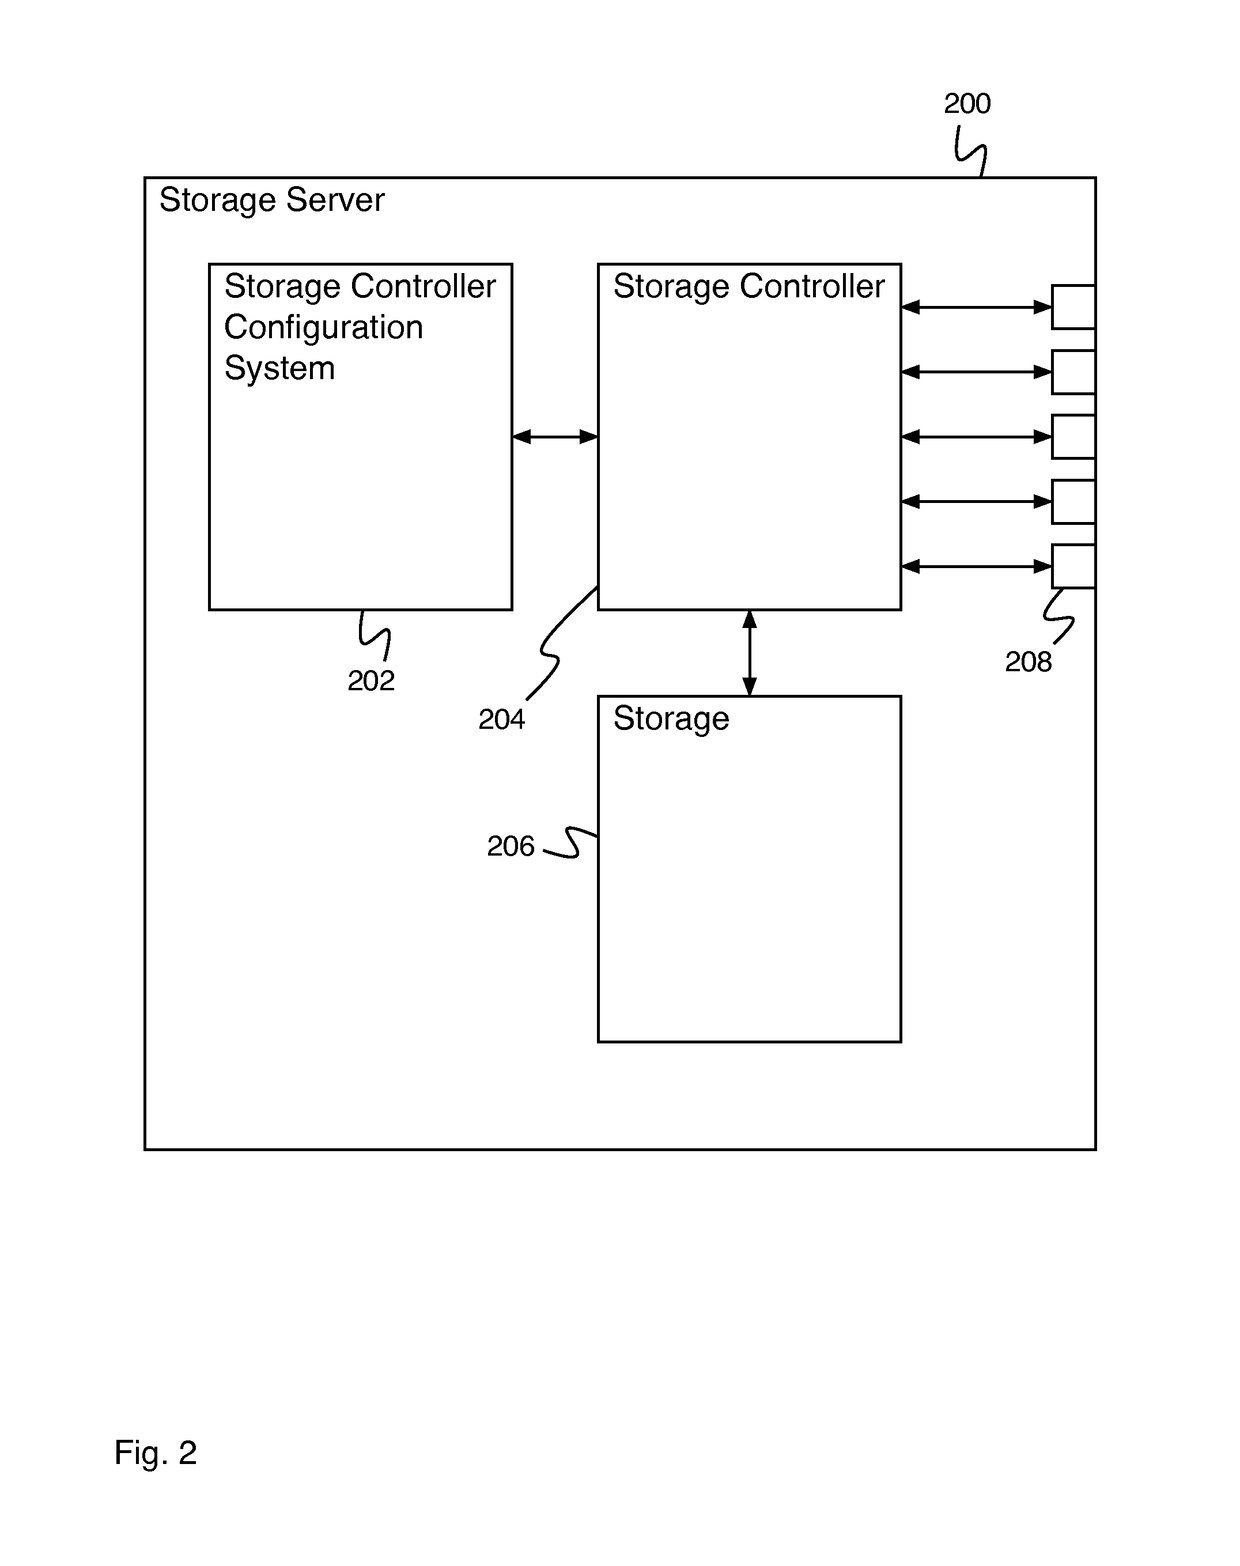 Batch configuration of virtual data storage devices